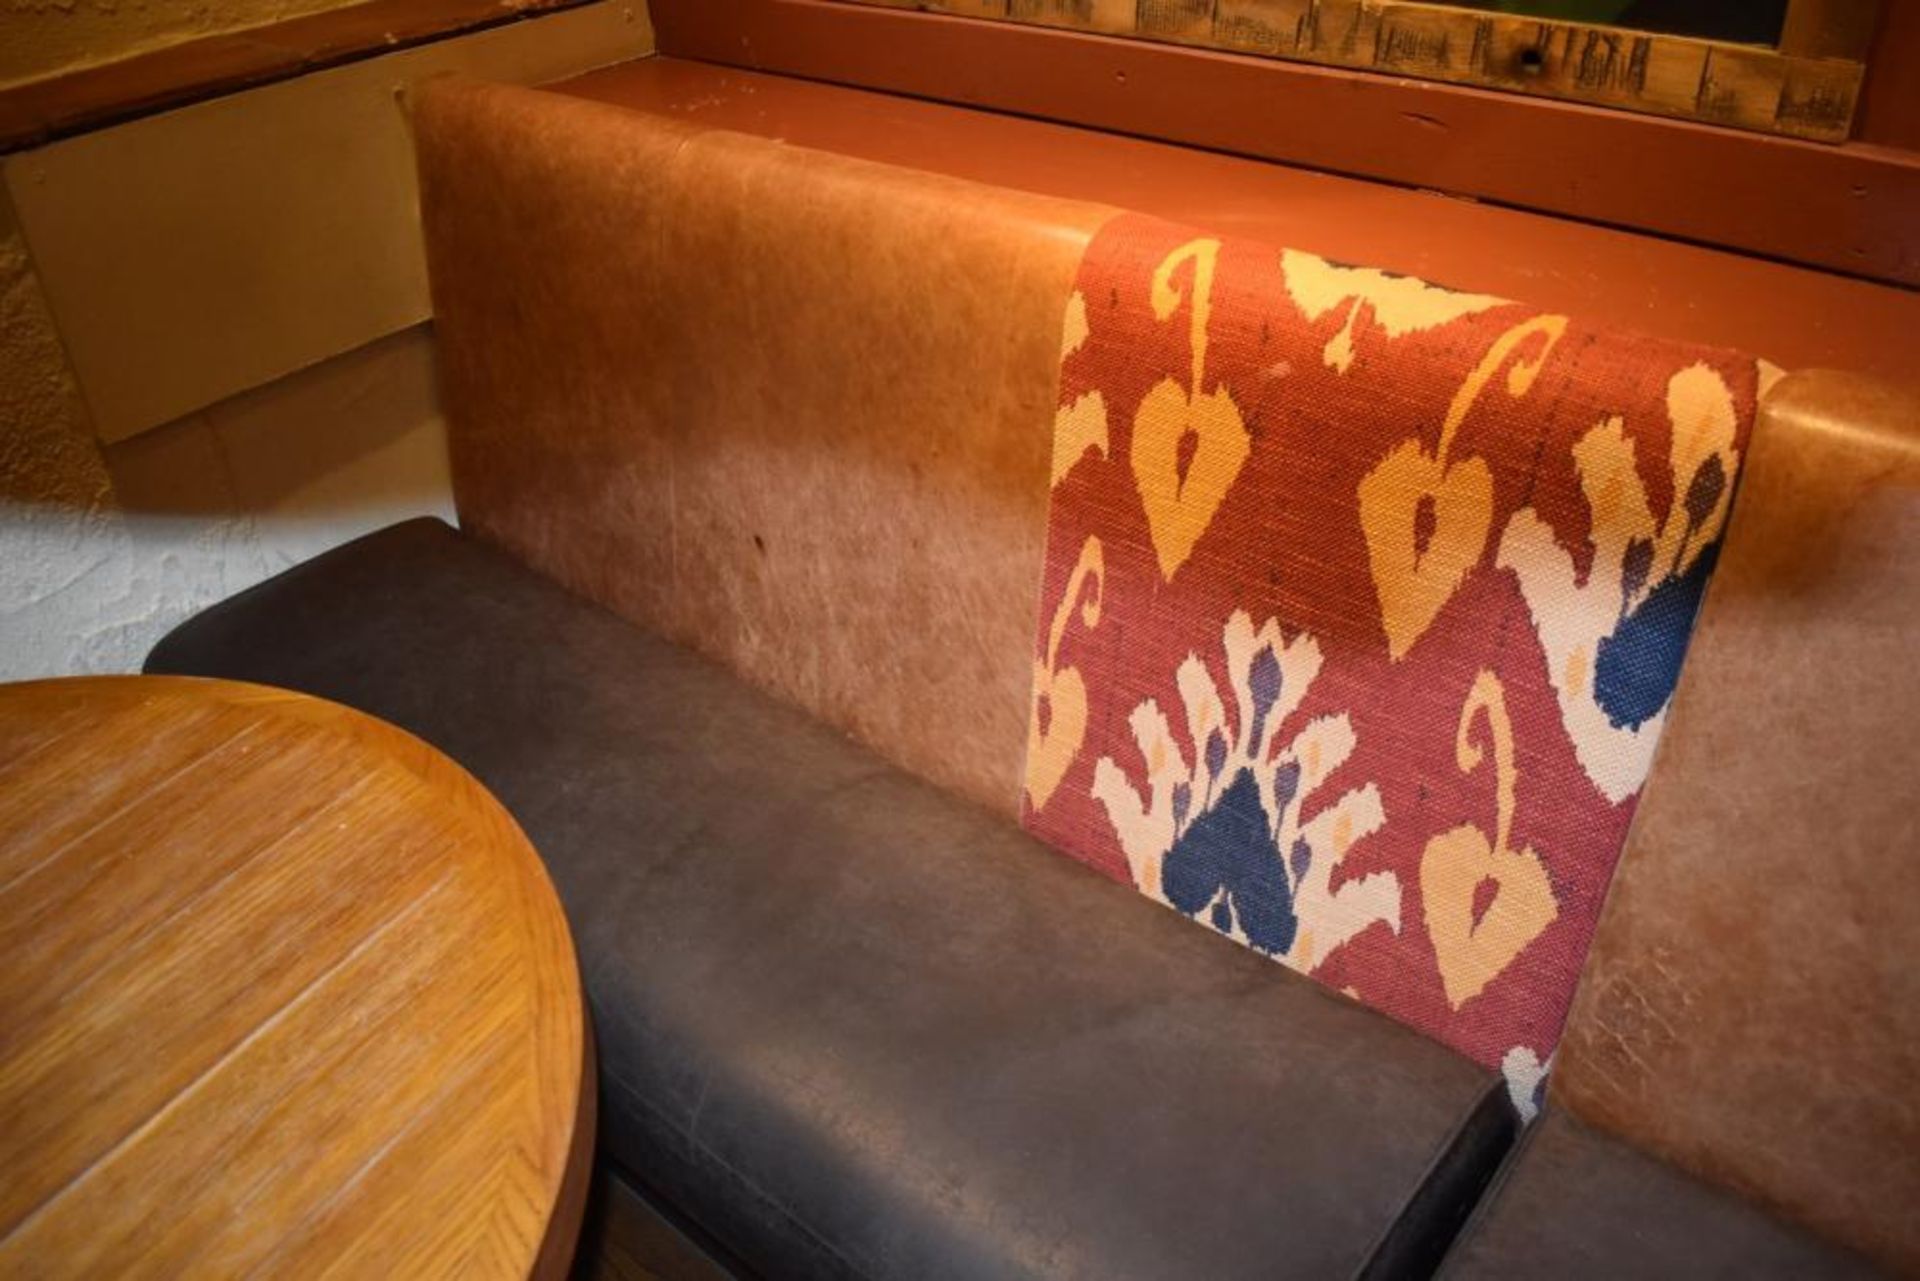 1 x Long Seating Bench From Mexican Themed Restaurant - CL461 - Ref PR889 - Location: London W3 - Image 3 of 7